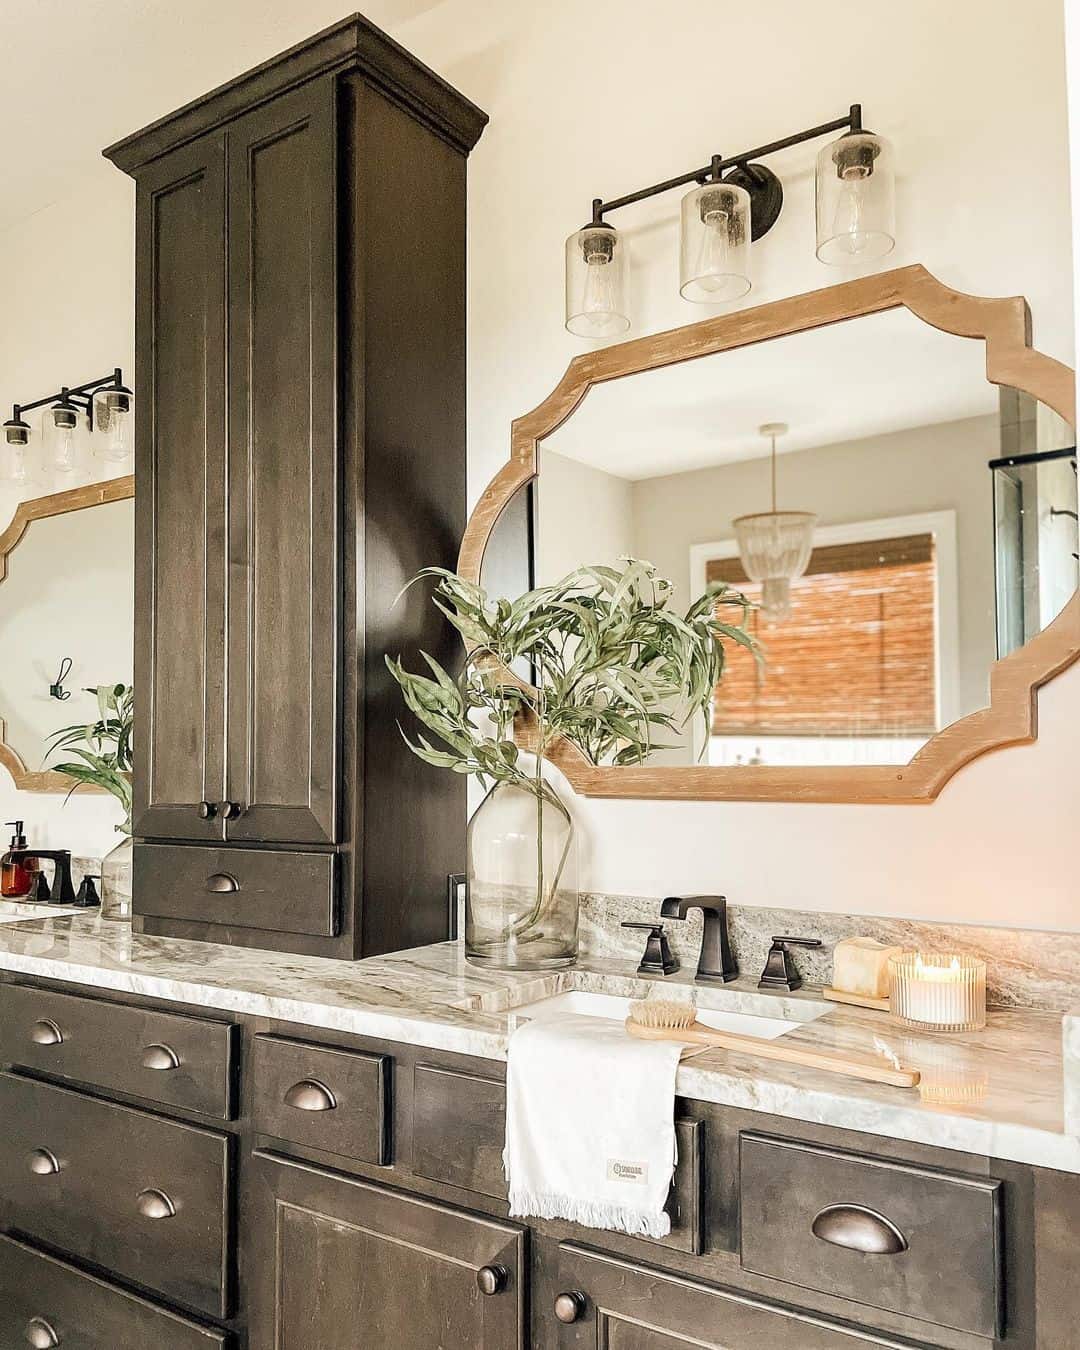 Uniquely Shaped Mirrors Separated by Wood Cabinet - Soul & Lane